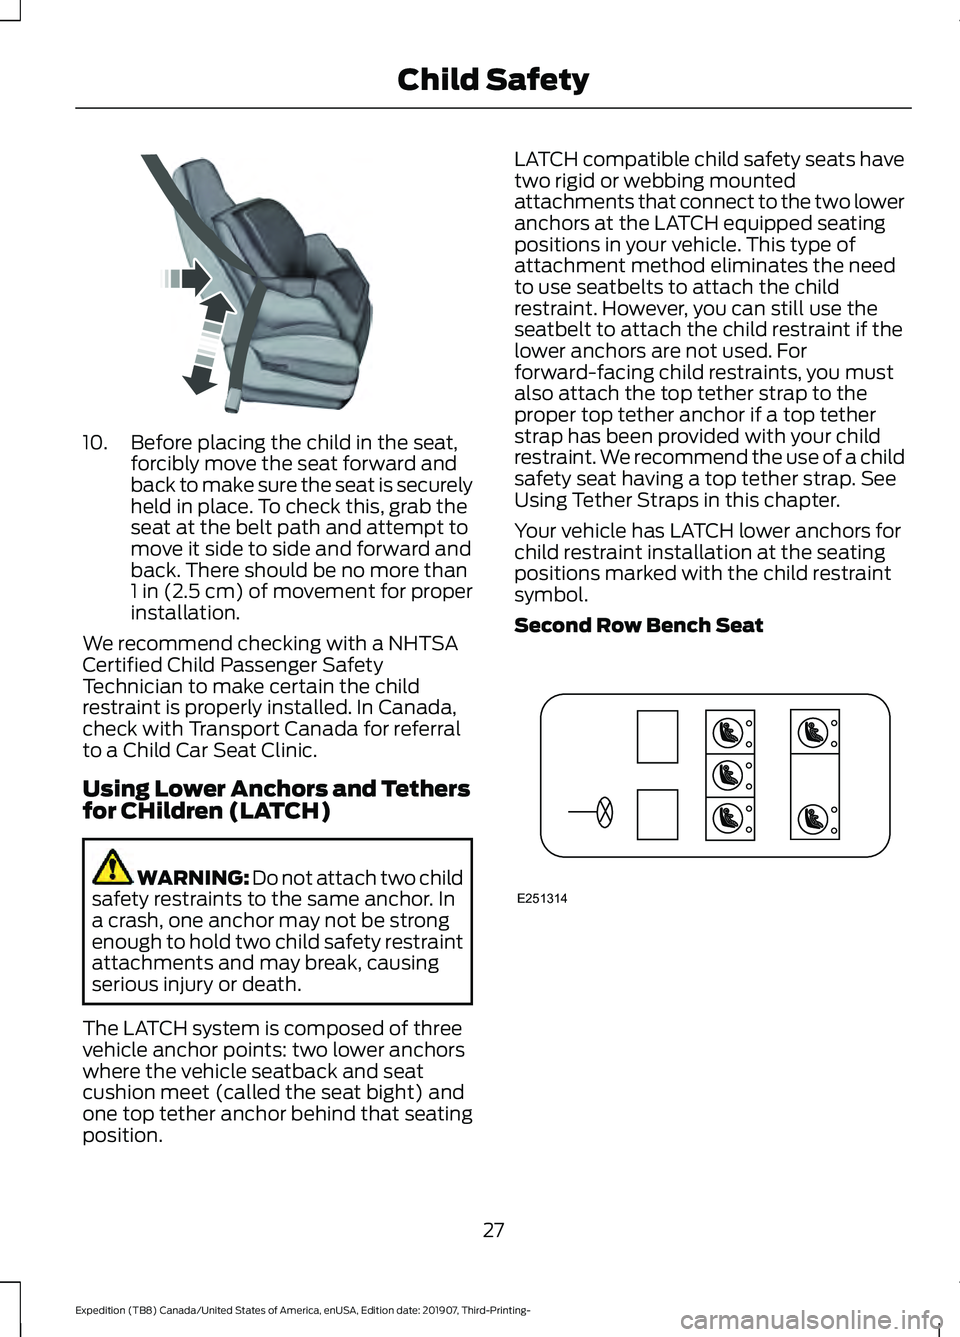 FORD EXPEDITION 2020  Owners Manual 10. Before placing the child in the seat,
forcibly move the seat forward and
back to make sure the seat is securely
held in place. To check this, grab the
seat at the belt path and attempt to
move it 